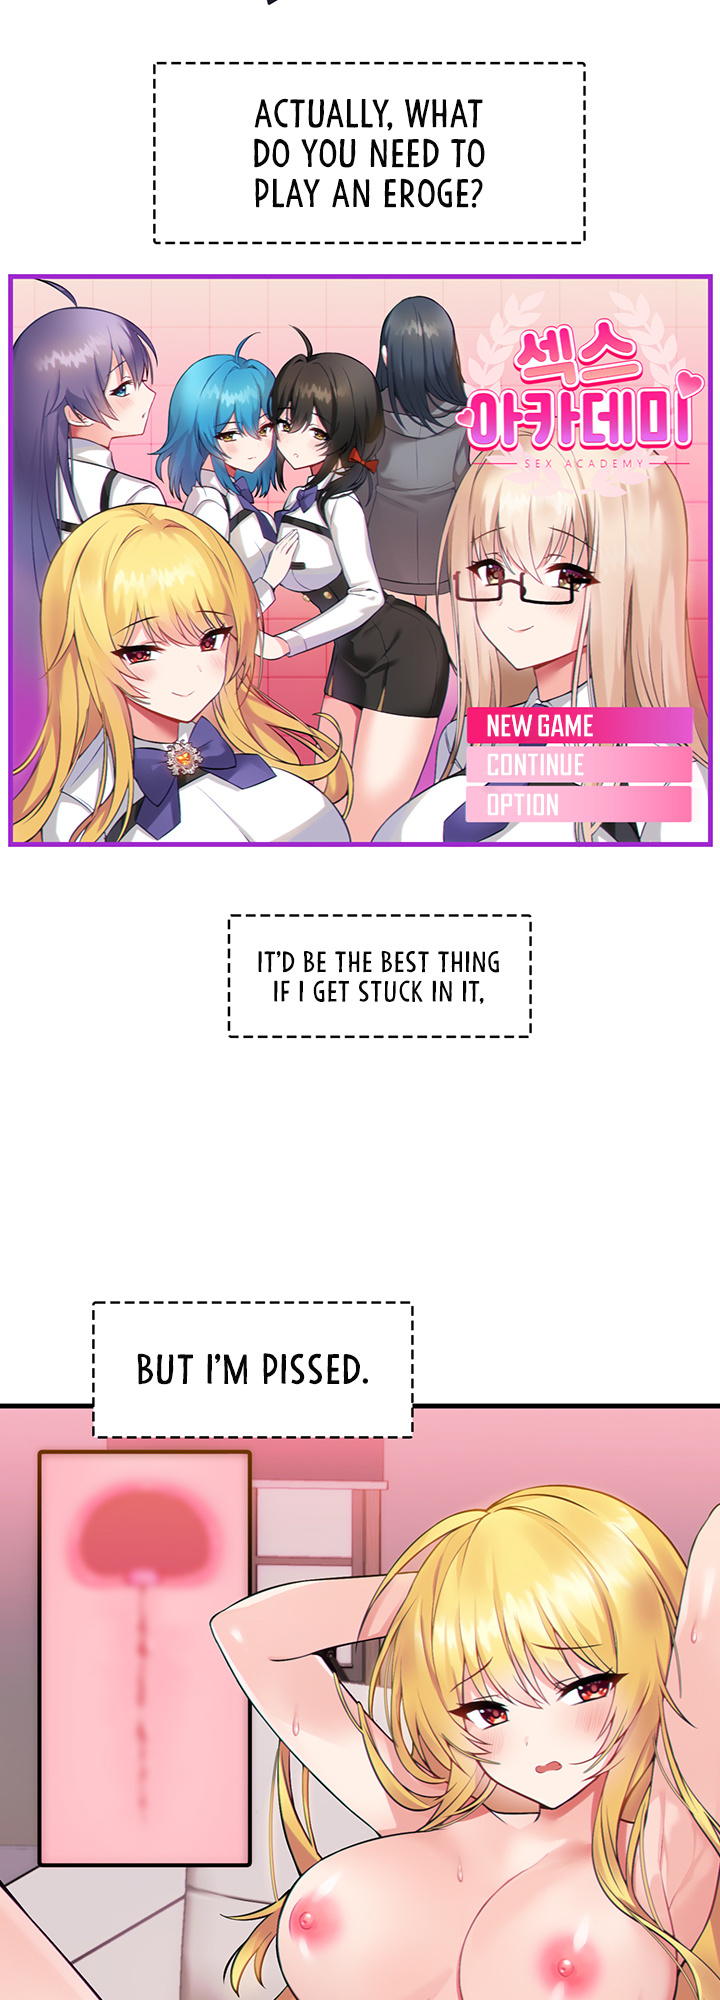 Trapped In The Academy's Eroge - Page 2